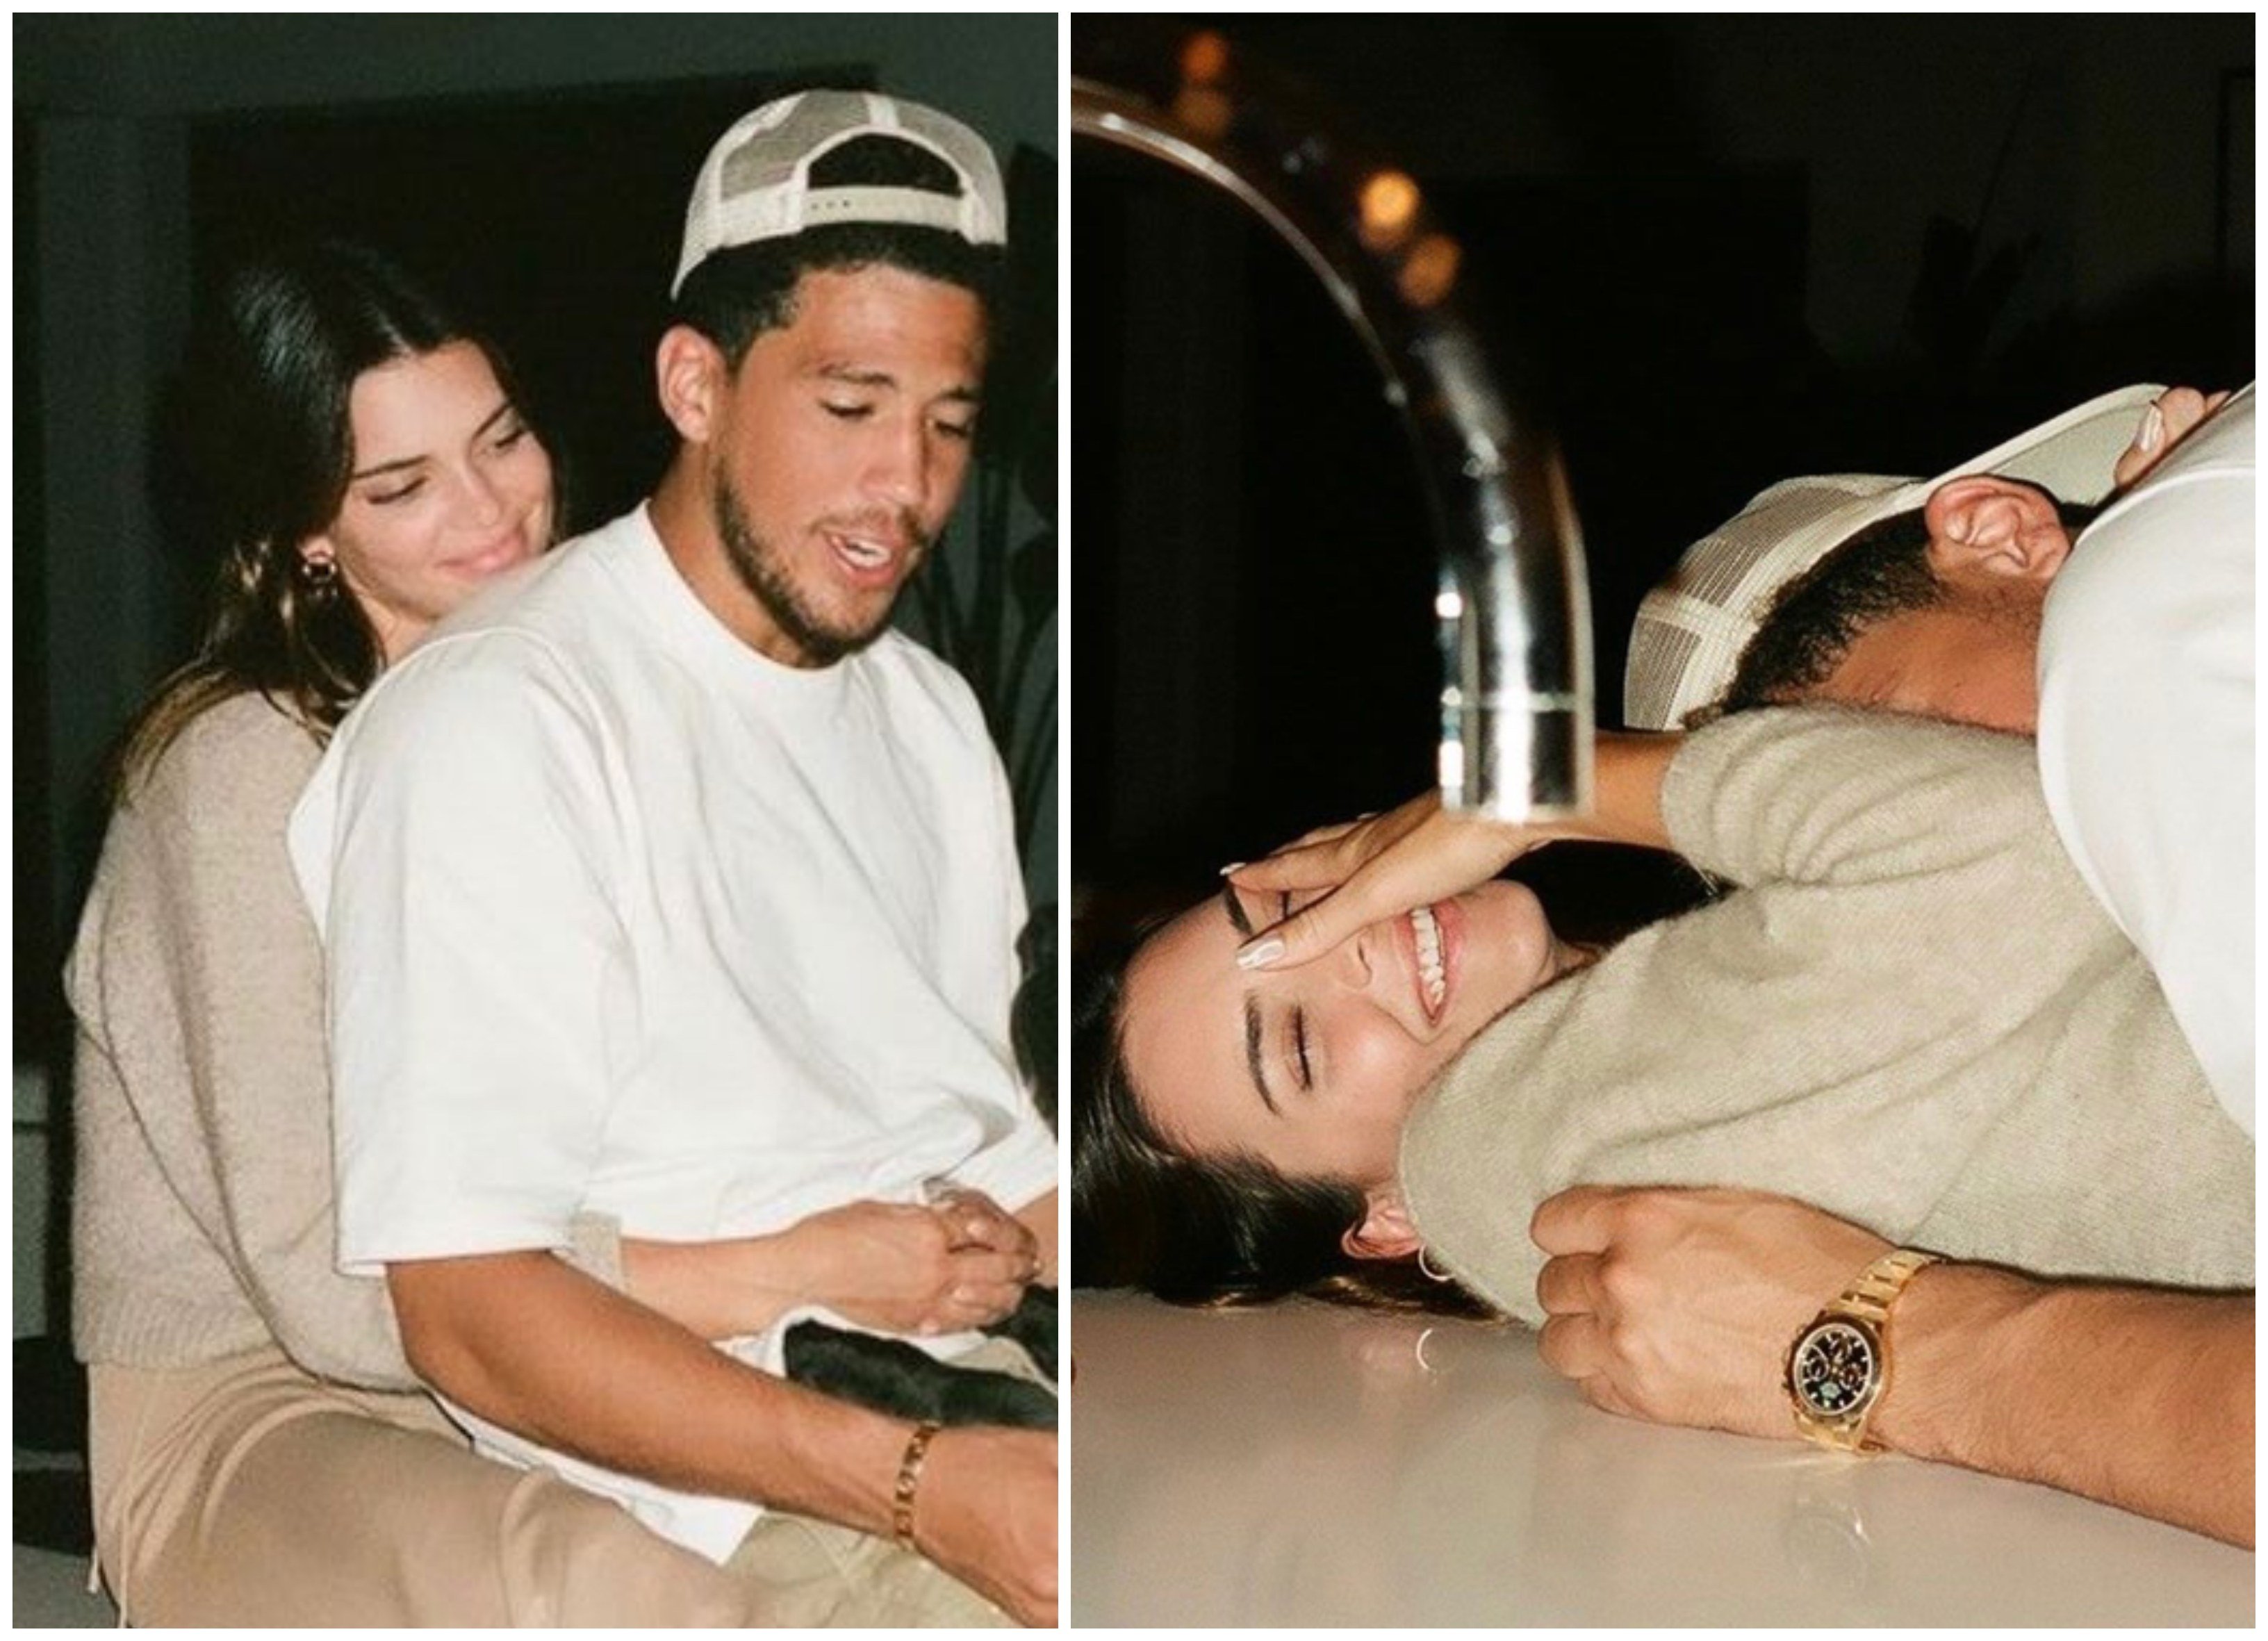 Kendall Jenner and Devin Booker’s PDA Instagram photos celebrating their first anniversary. Photos: @kendalljenner/Instagram